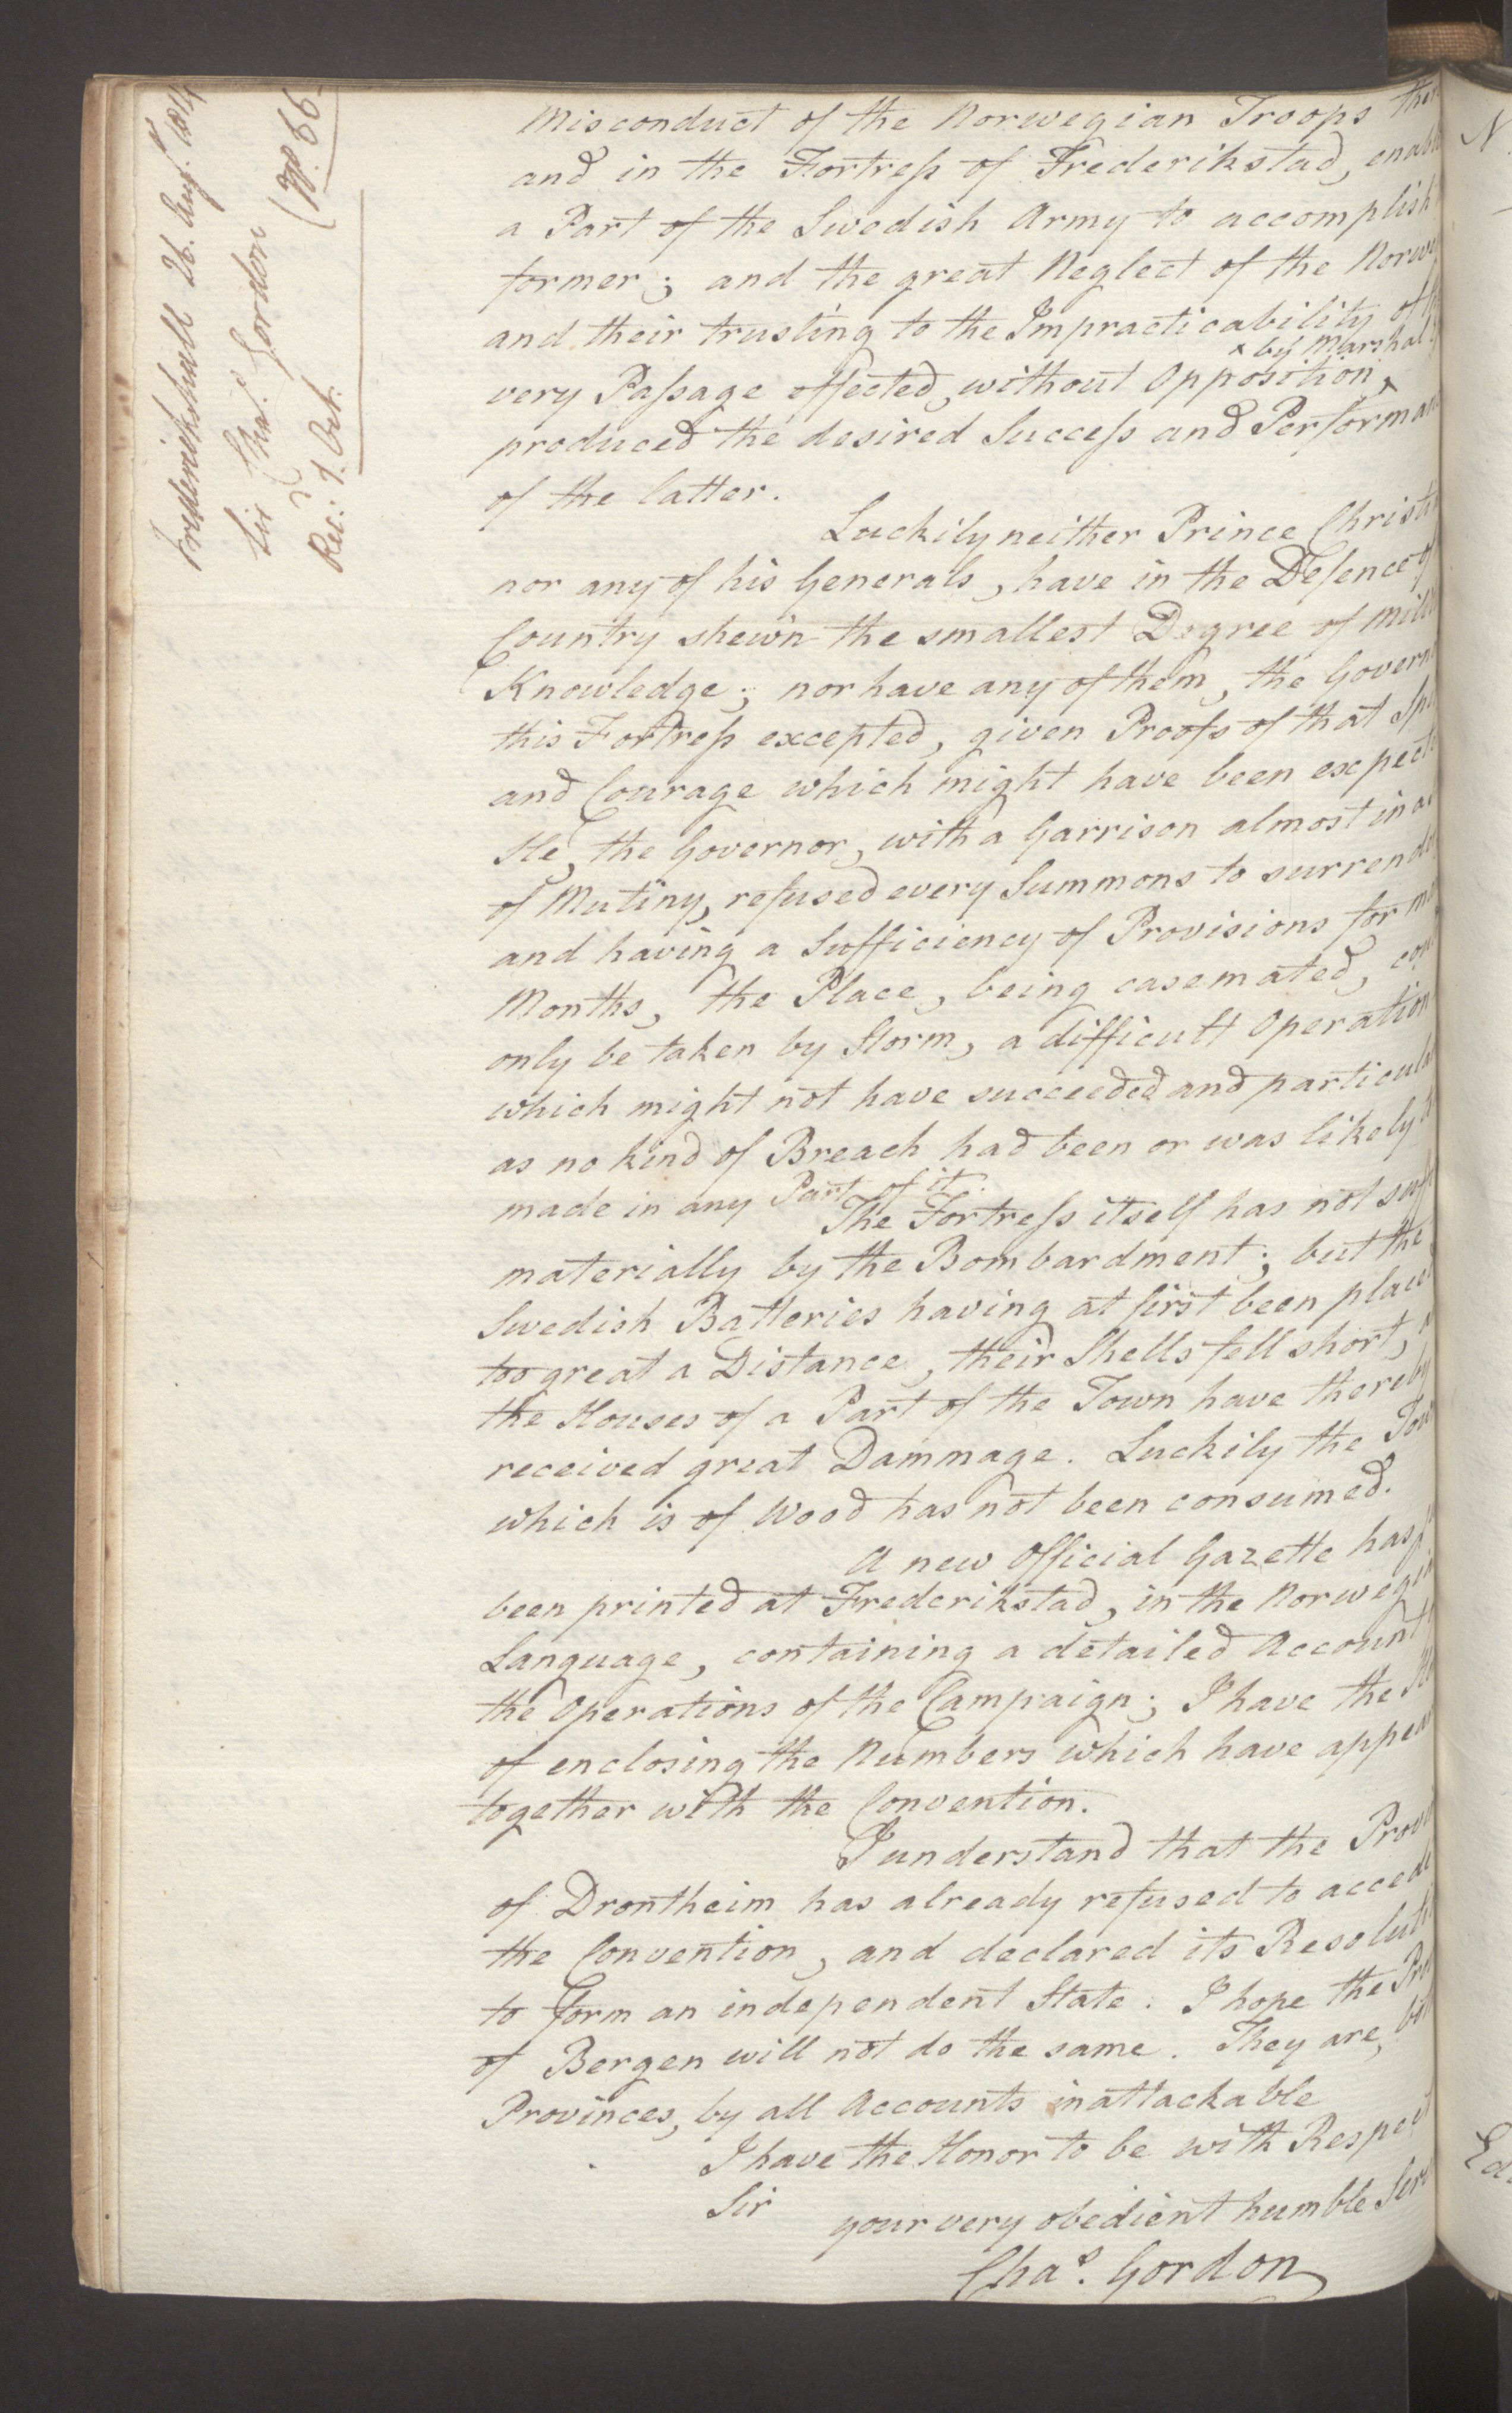 Foreign Office*, UKA/-/FO 38/16: Sir C. Gordon. Reports from Malmö, Jonkoping, and Helsingborg, 1814, s. 98